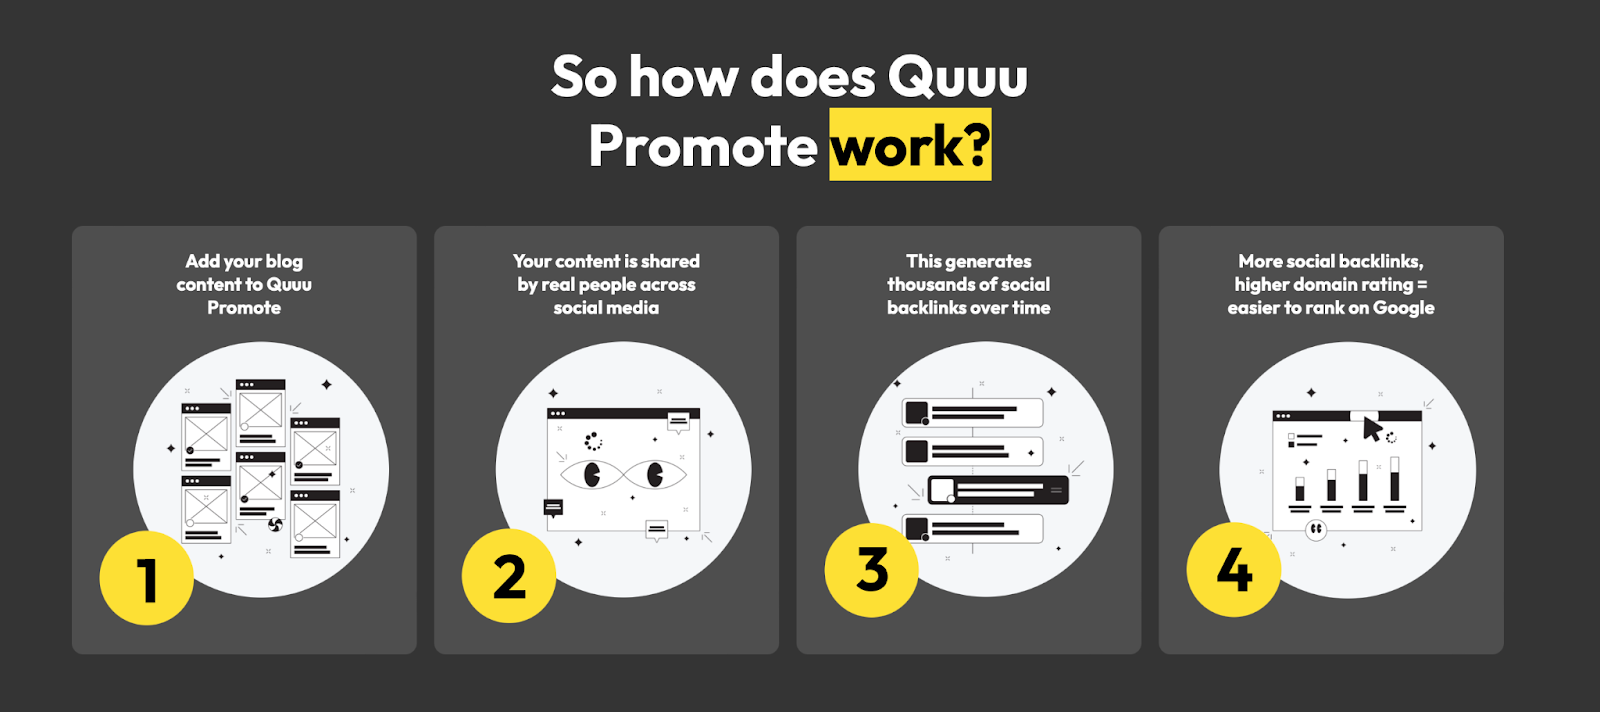 An illustration of how Quuu Promote works. Firstly, "Add your blog content to Quuu Promote", then "Your content is shared by real people across social media", followed by "This generates thousands of social backlinks over time", and finally "More social backlinks, higher domain rating= easier to rank on Google".